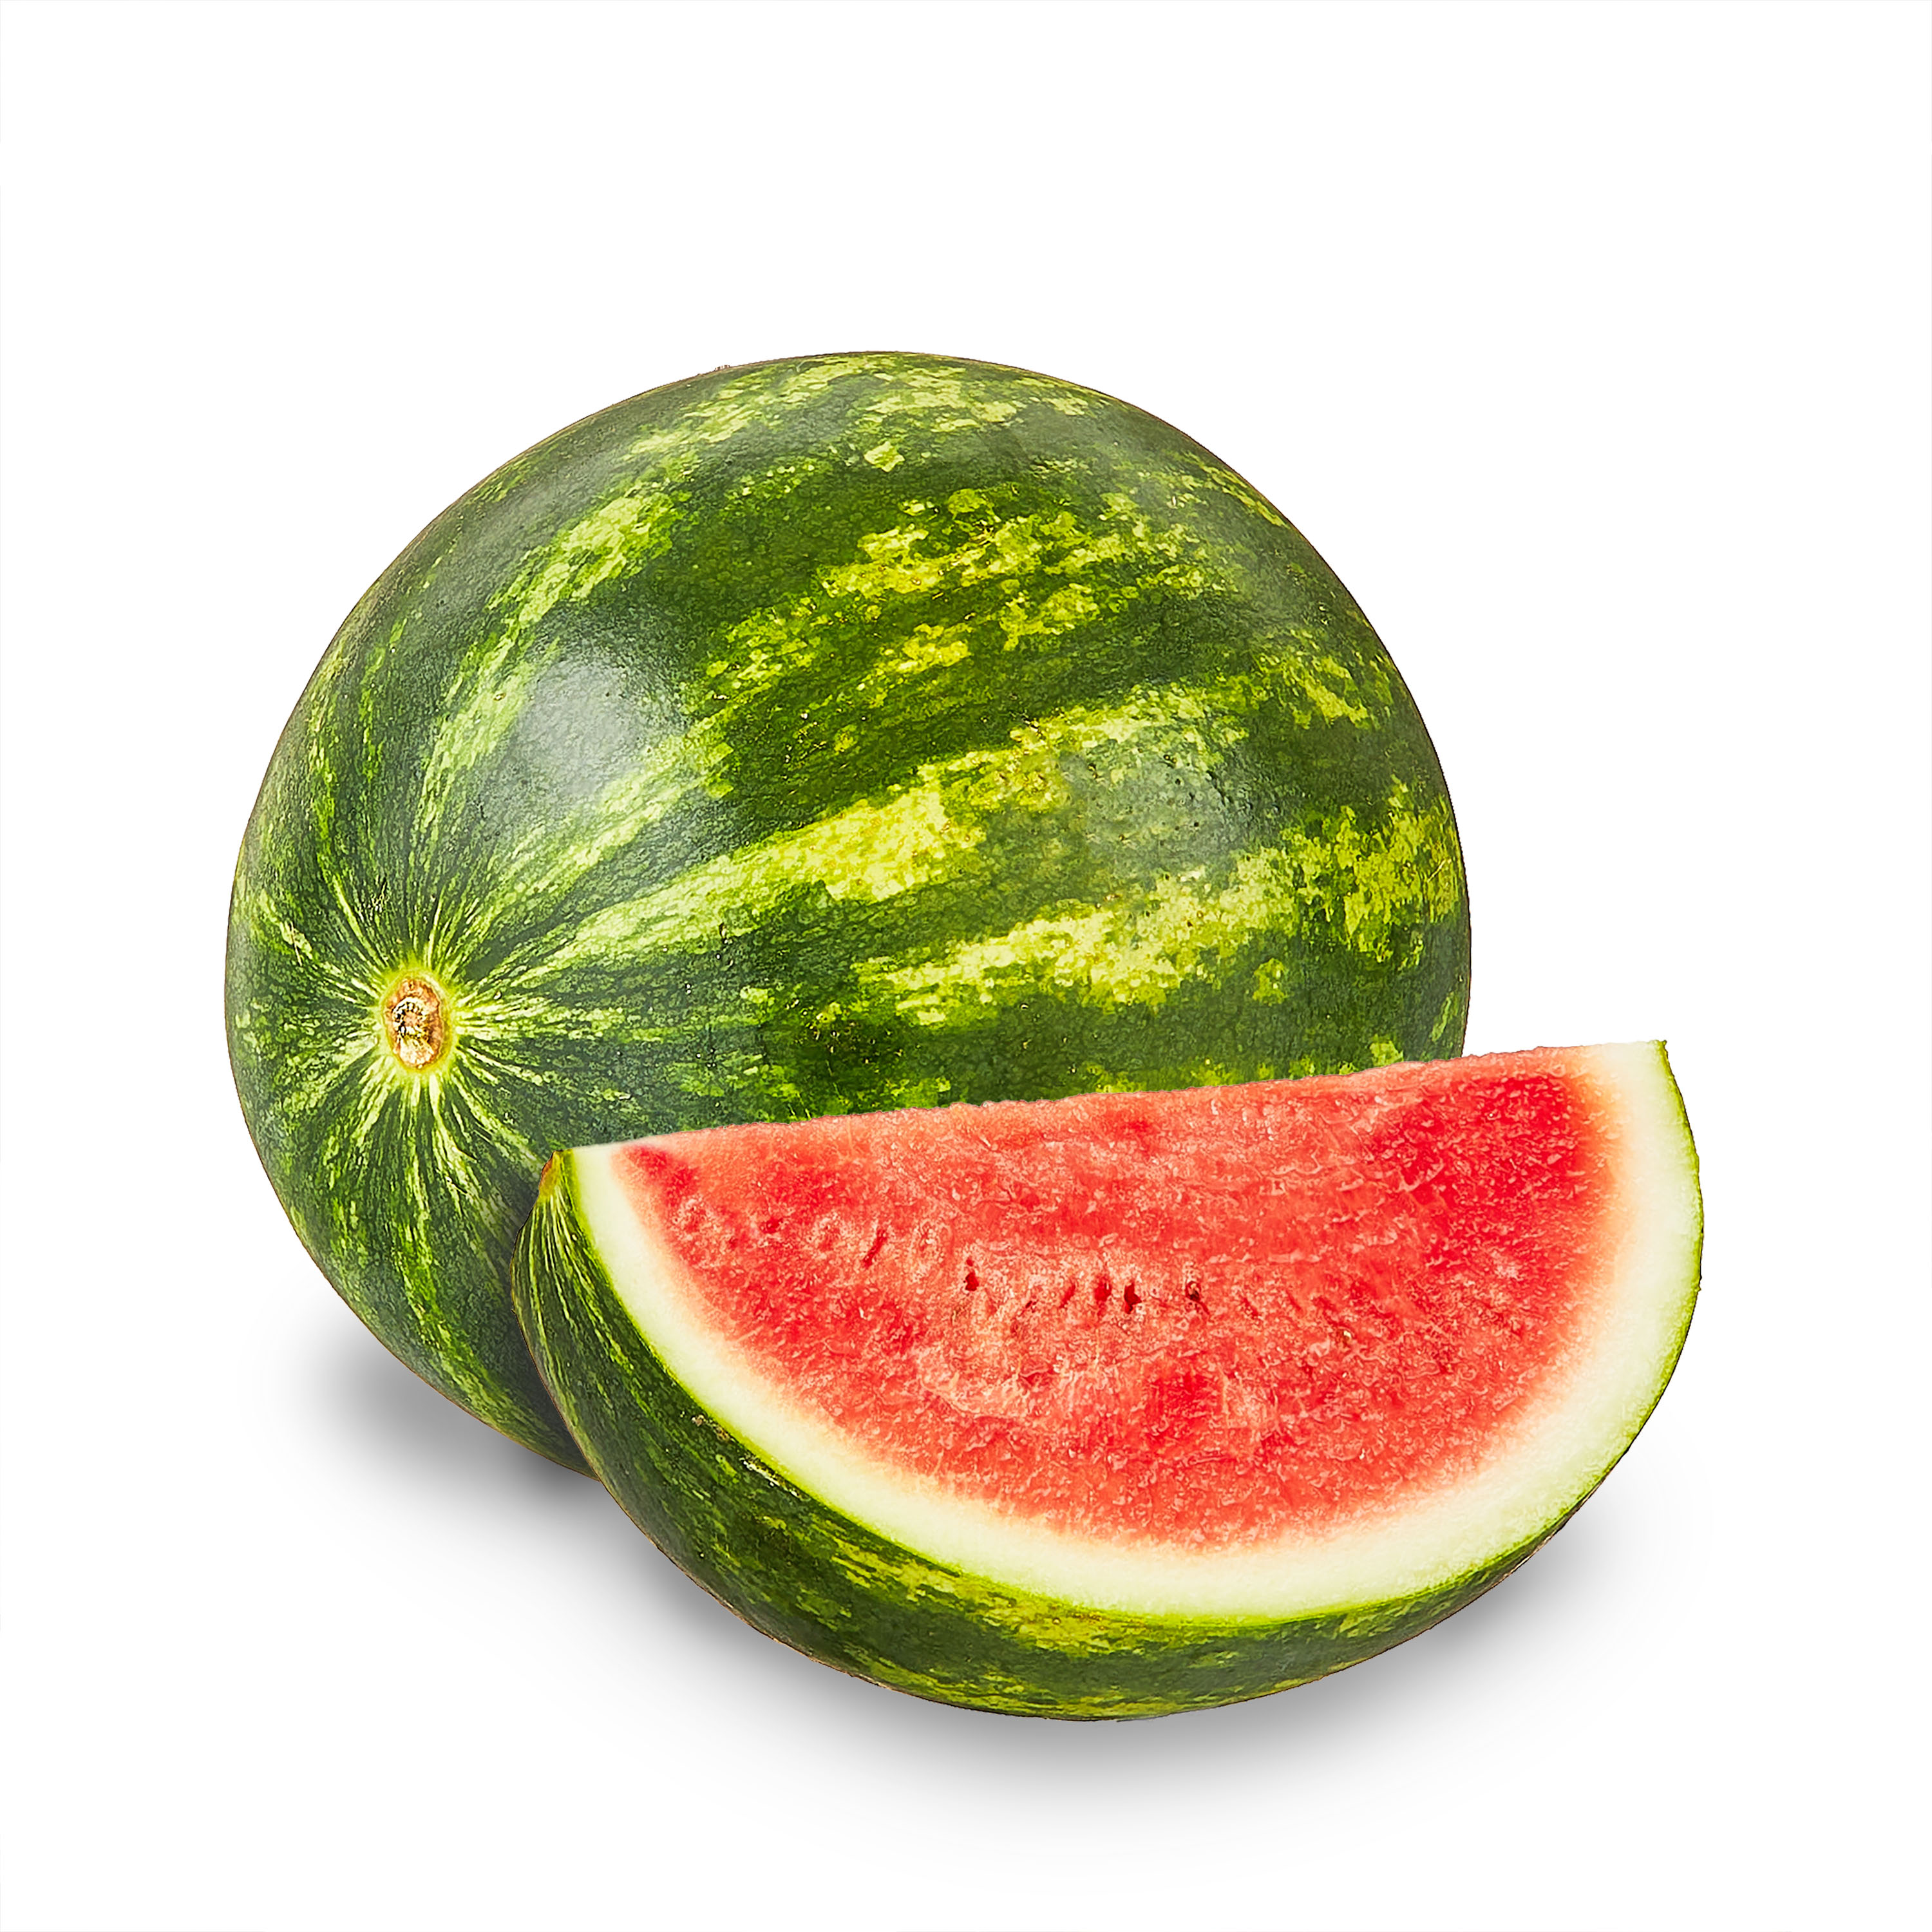 Fresh Personal Watermelon, Each - image 1 of 6